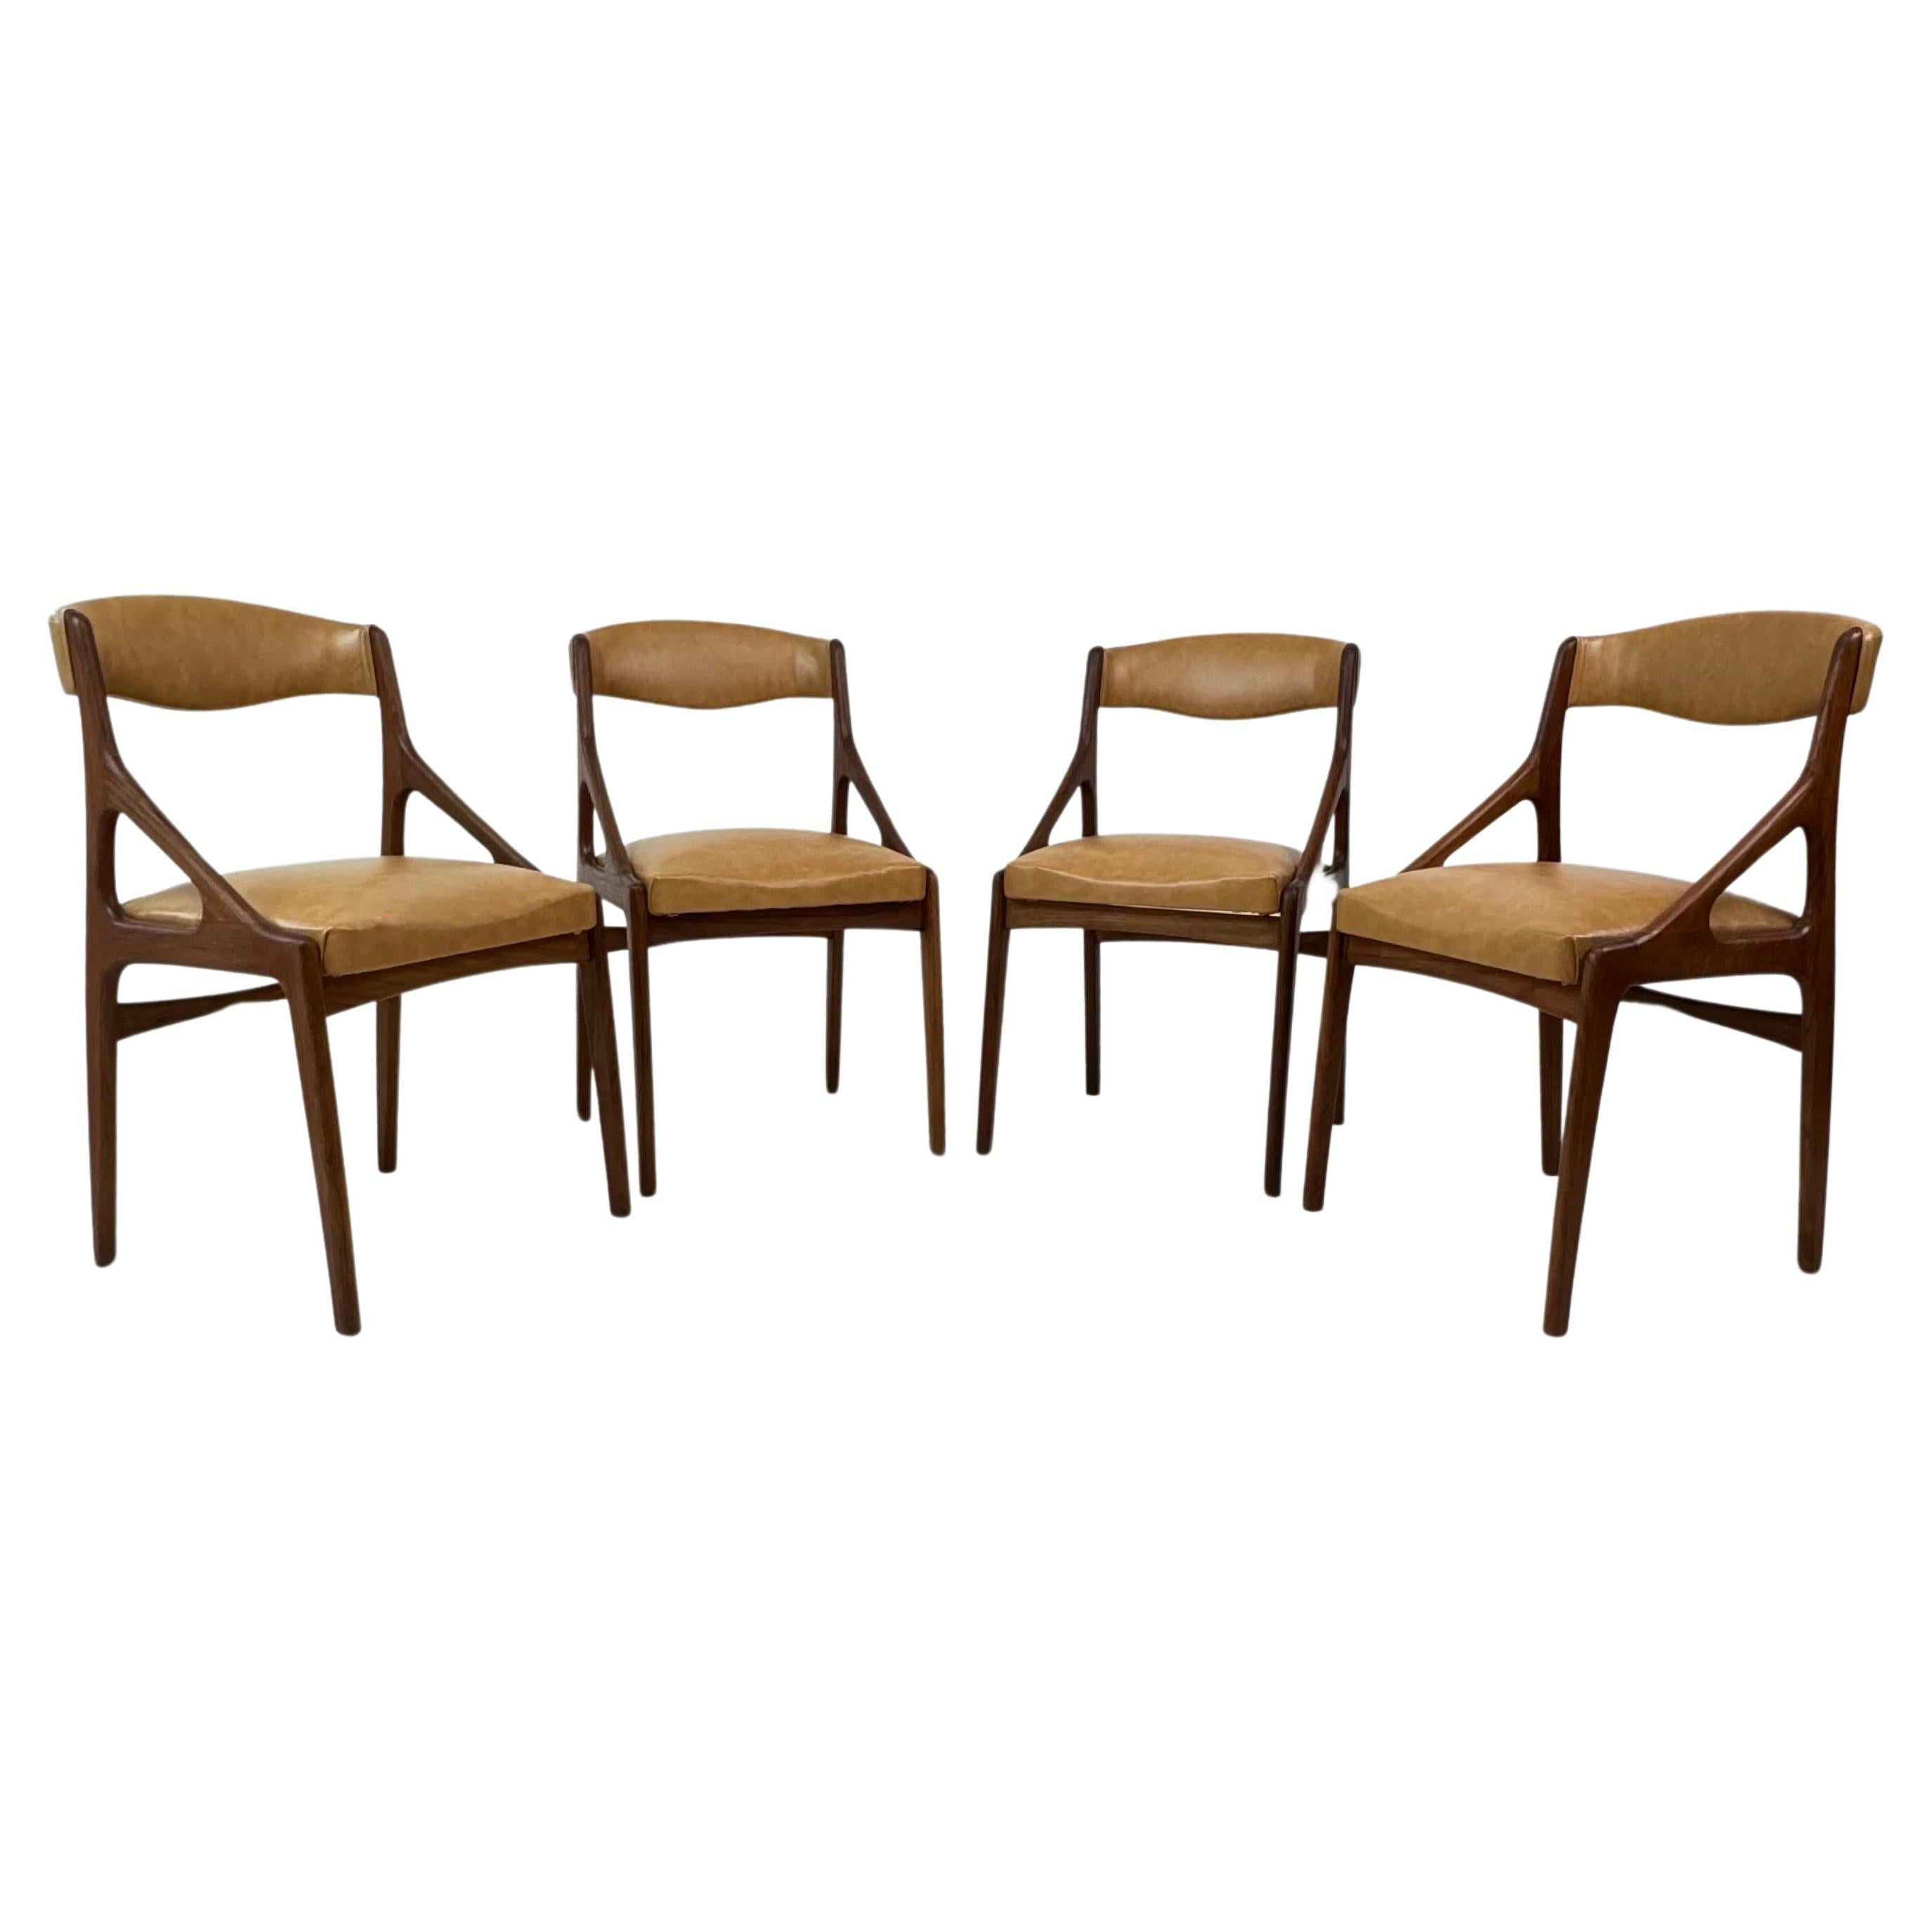 Set of Four Midcentury Modern Teak and Leatherette Dining Chairs c.1960's For Sale